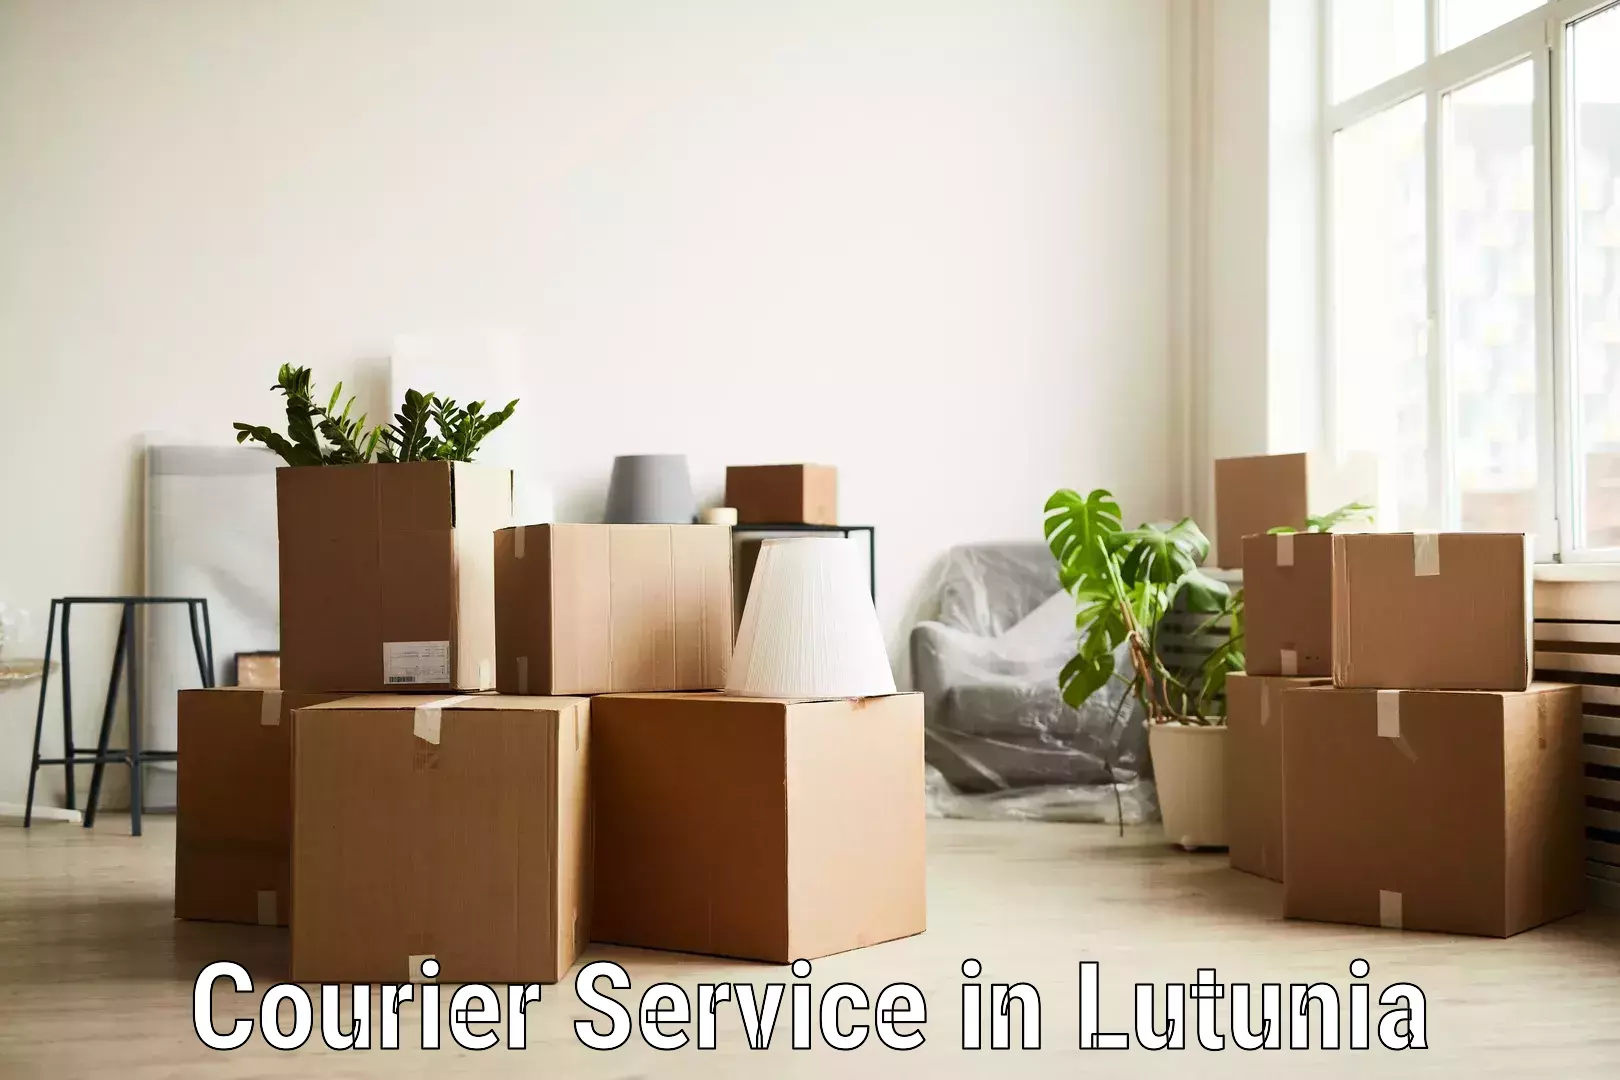 Professional parcel services in Lutunia